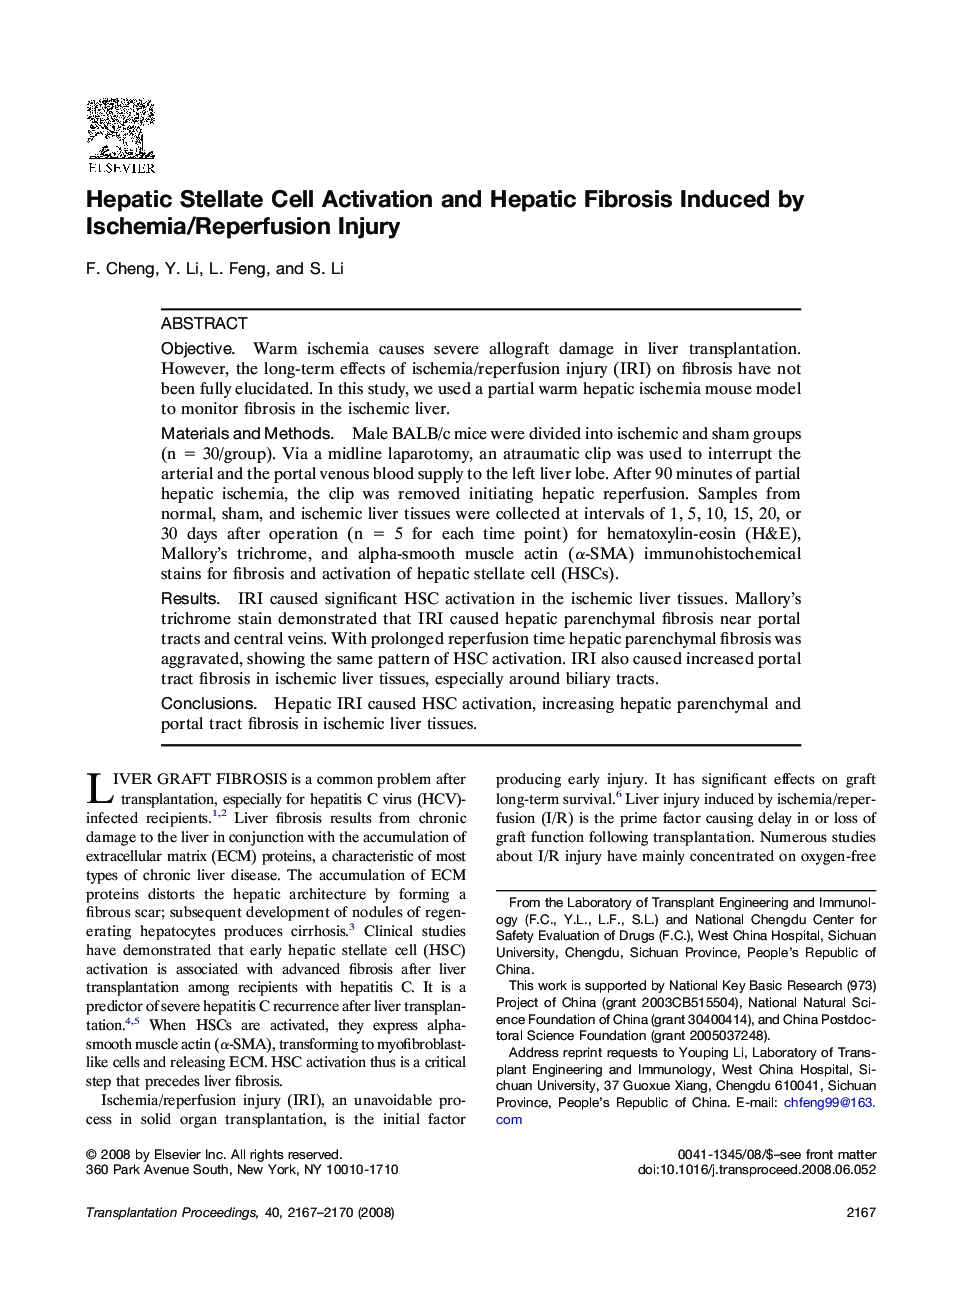 Hepatic Stellate Cell Activation and Hepatic Fibrosis Induced by Ischemia/Reperfusion Injury 